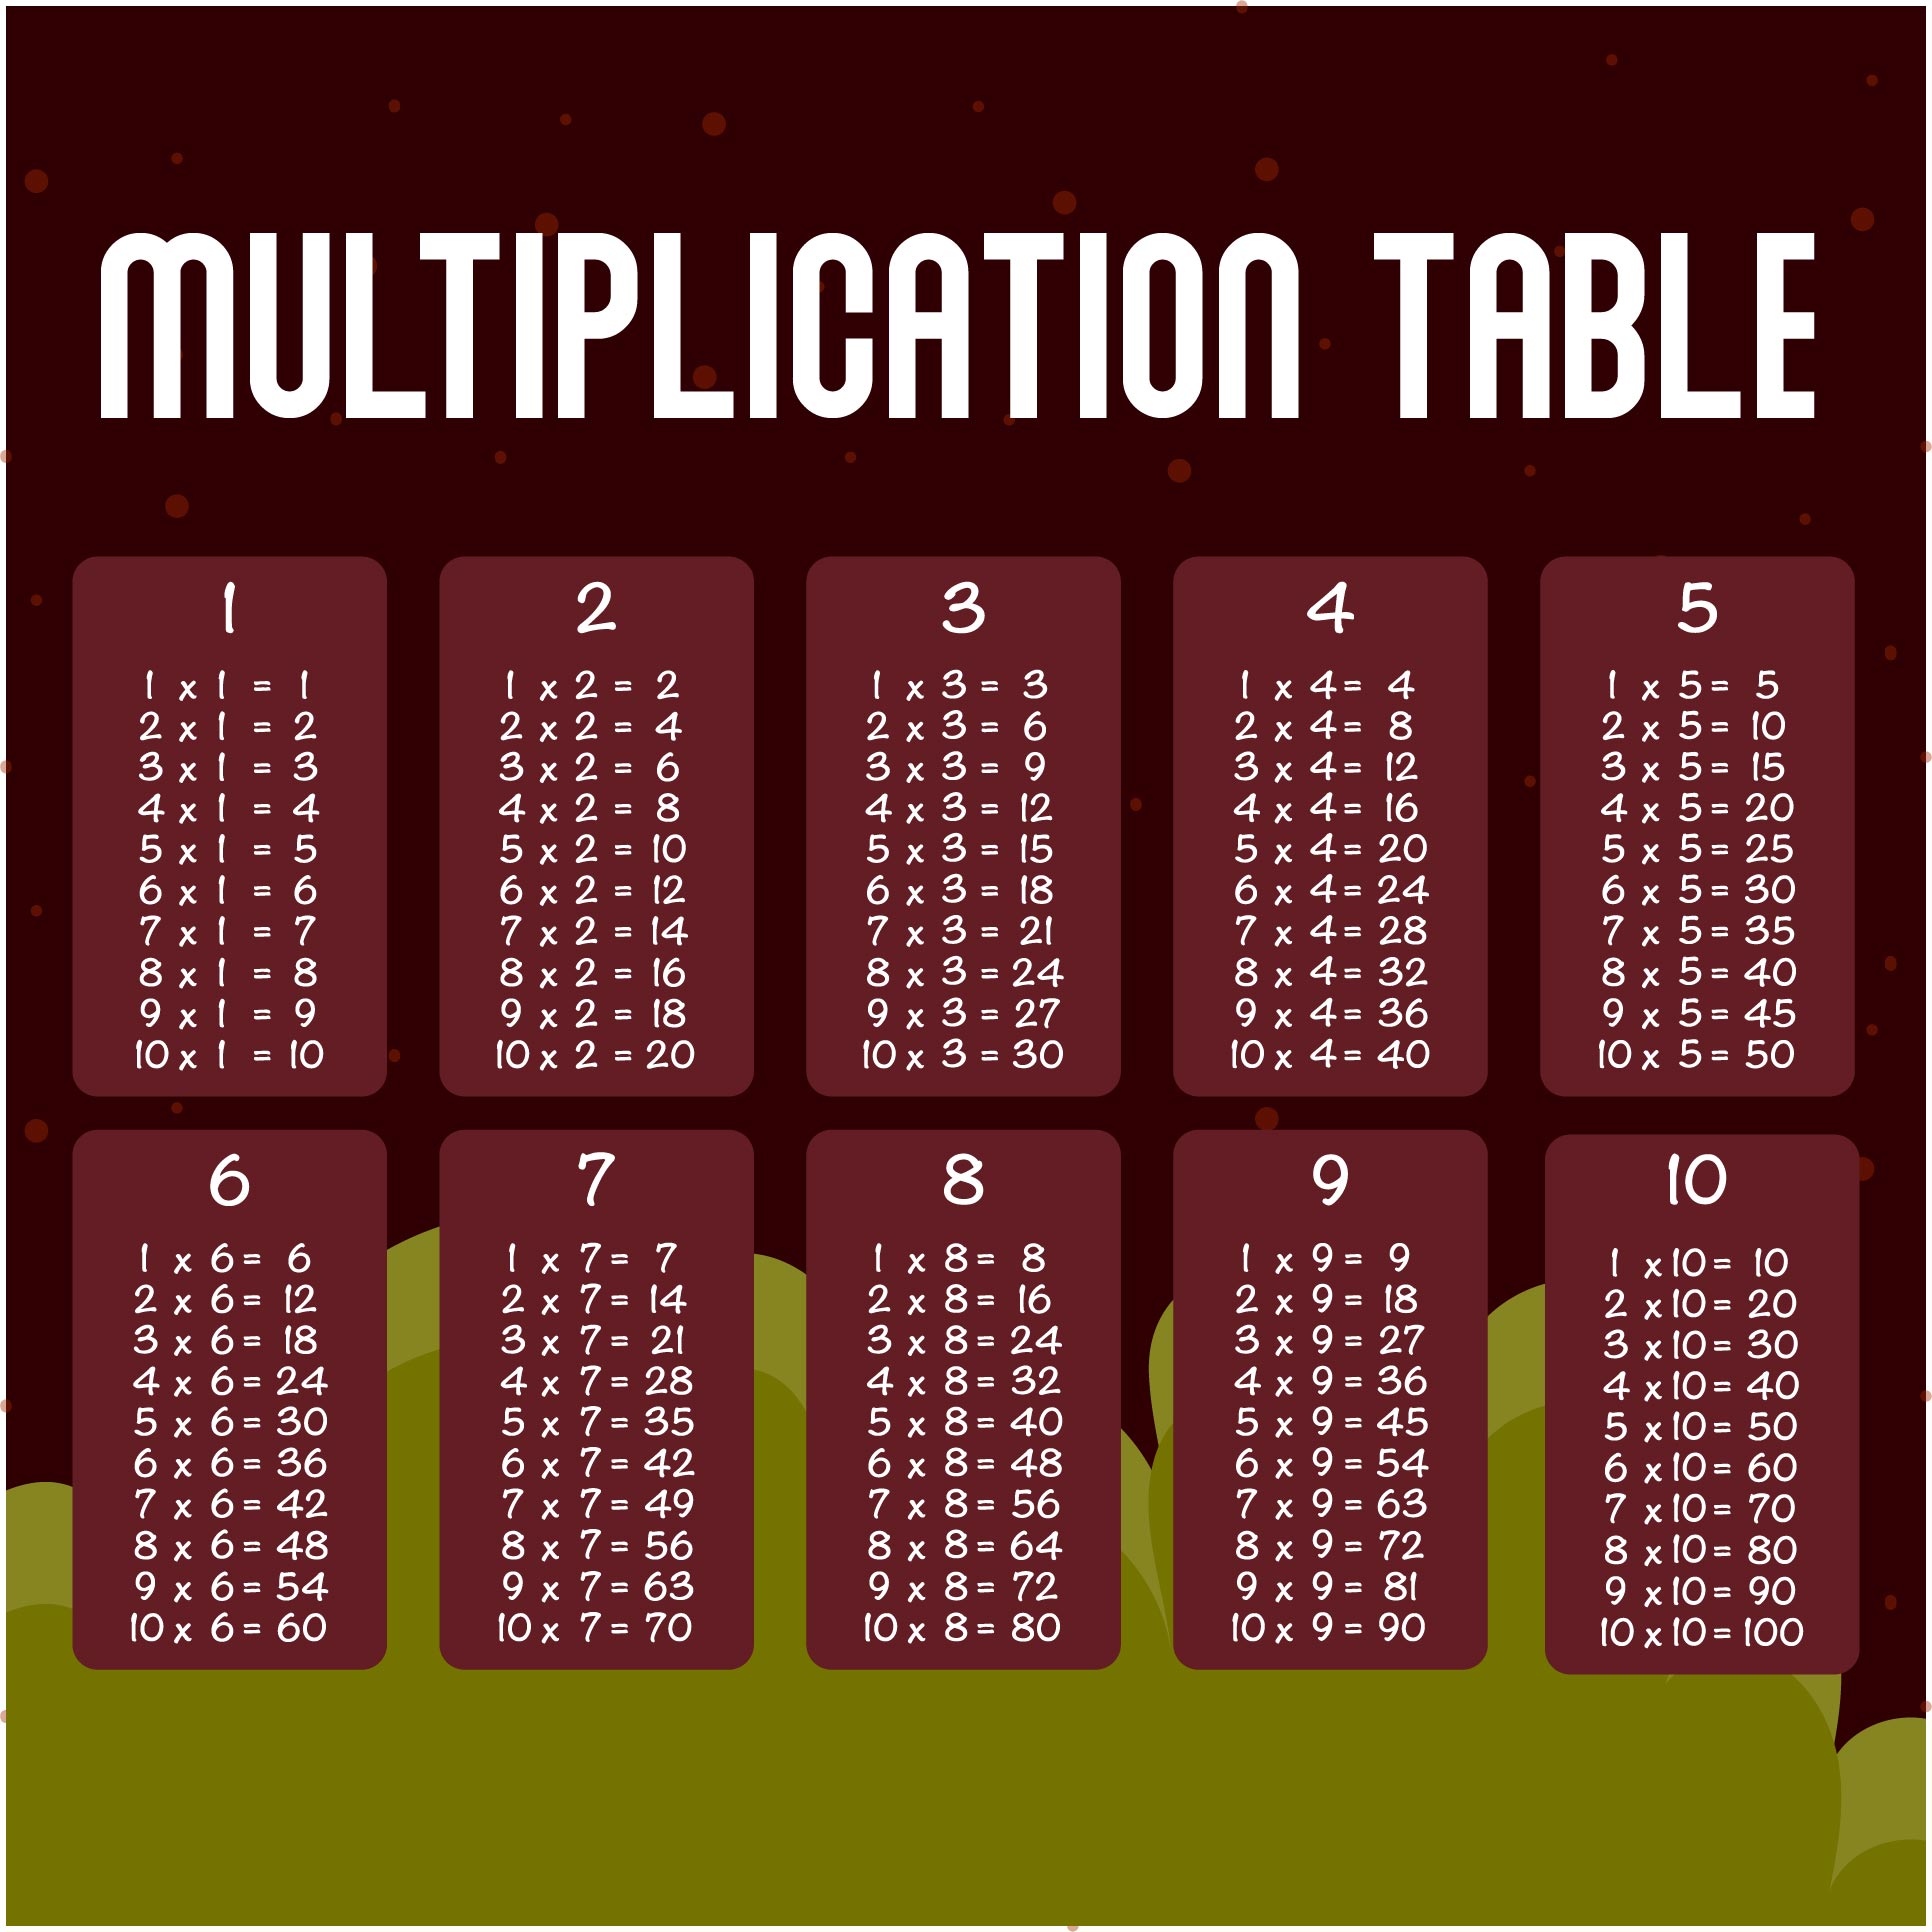 7-best-images-of-printable-multiplication-tables-0-12-multiplication